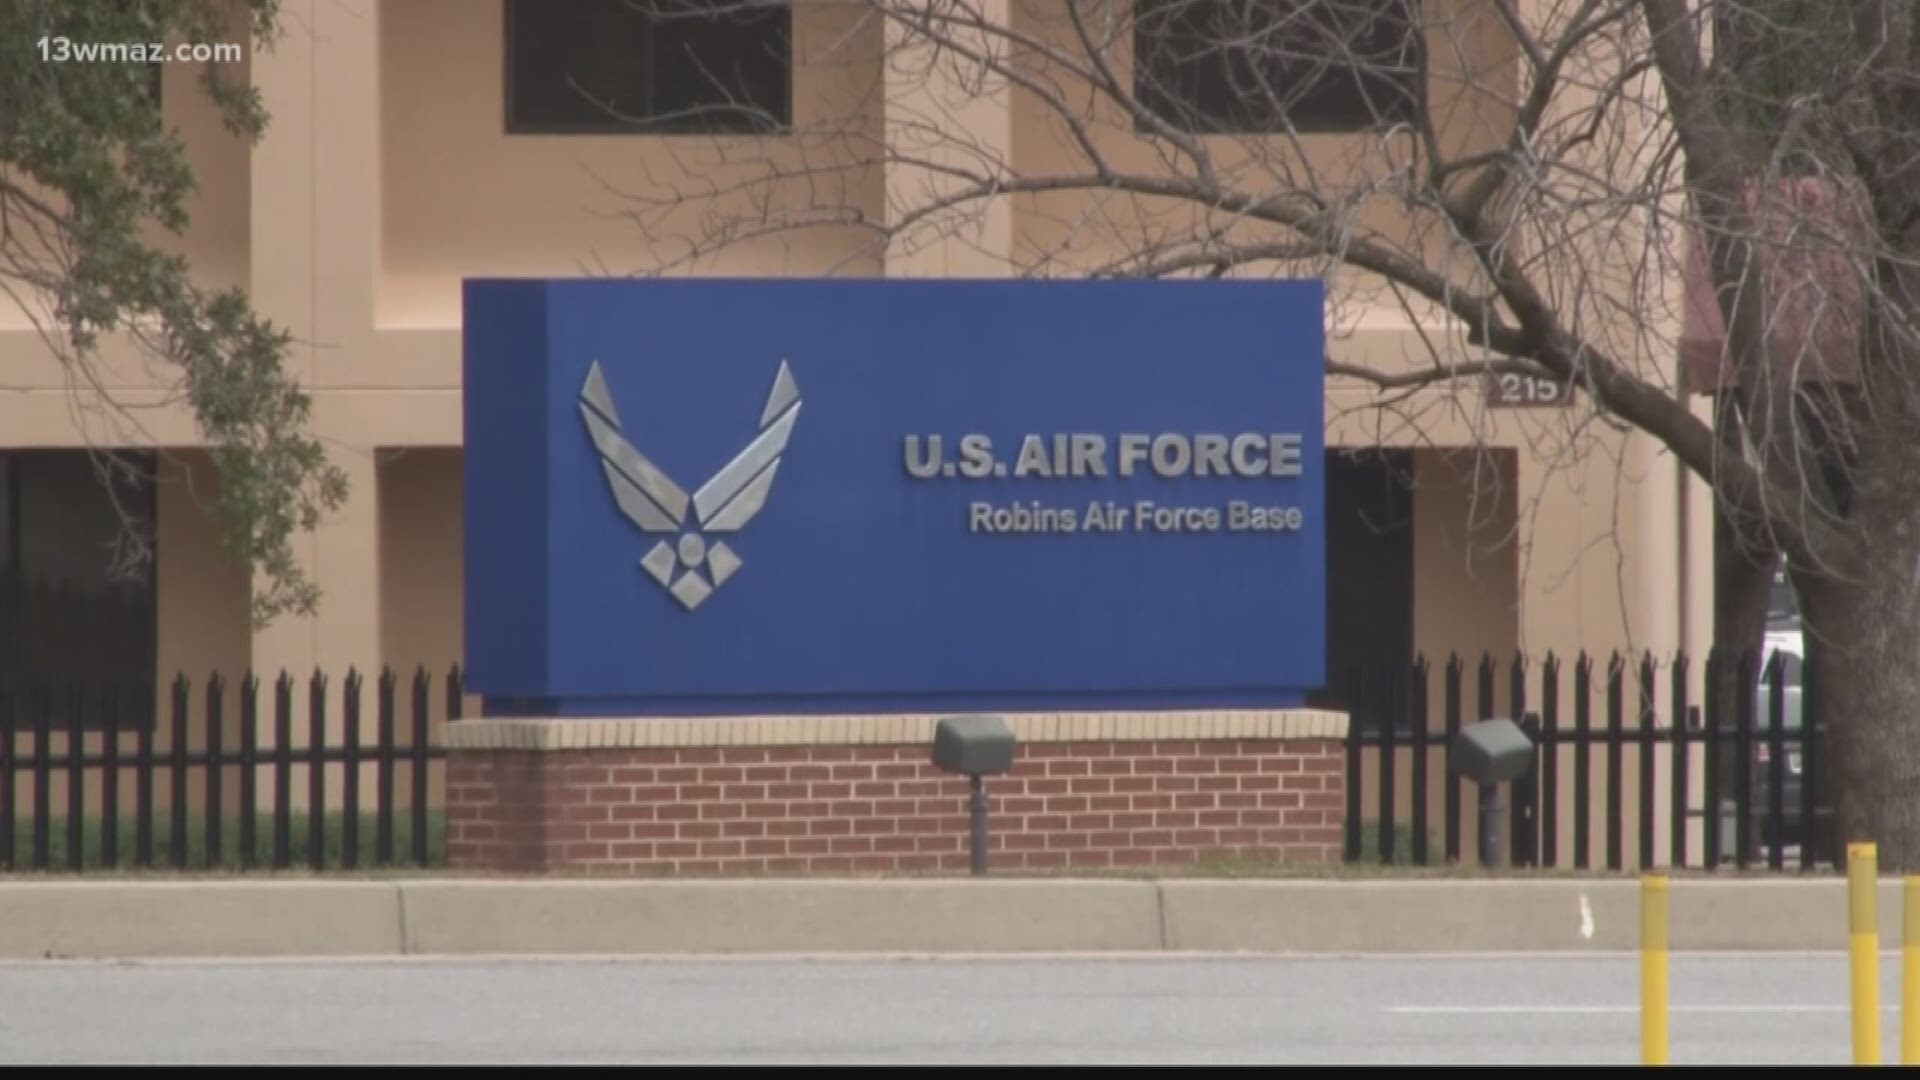 One state representative wants to reduce the high rate of military spouse unemployment nationwide with a bill to make it easier for those spouses to find jobs.